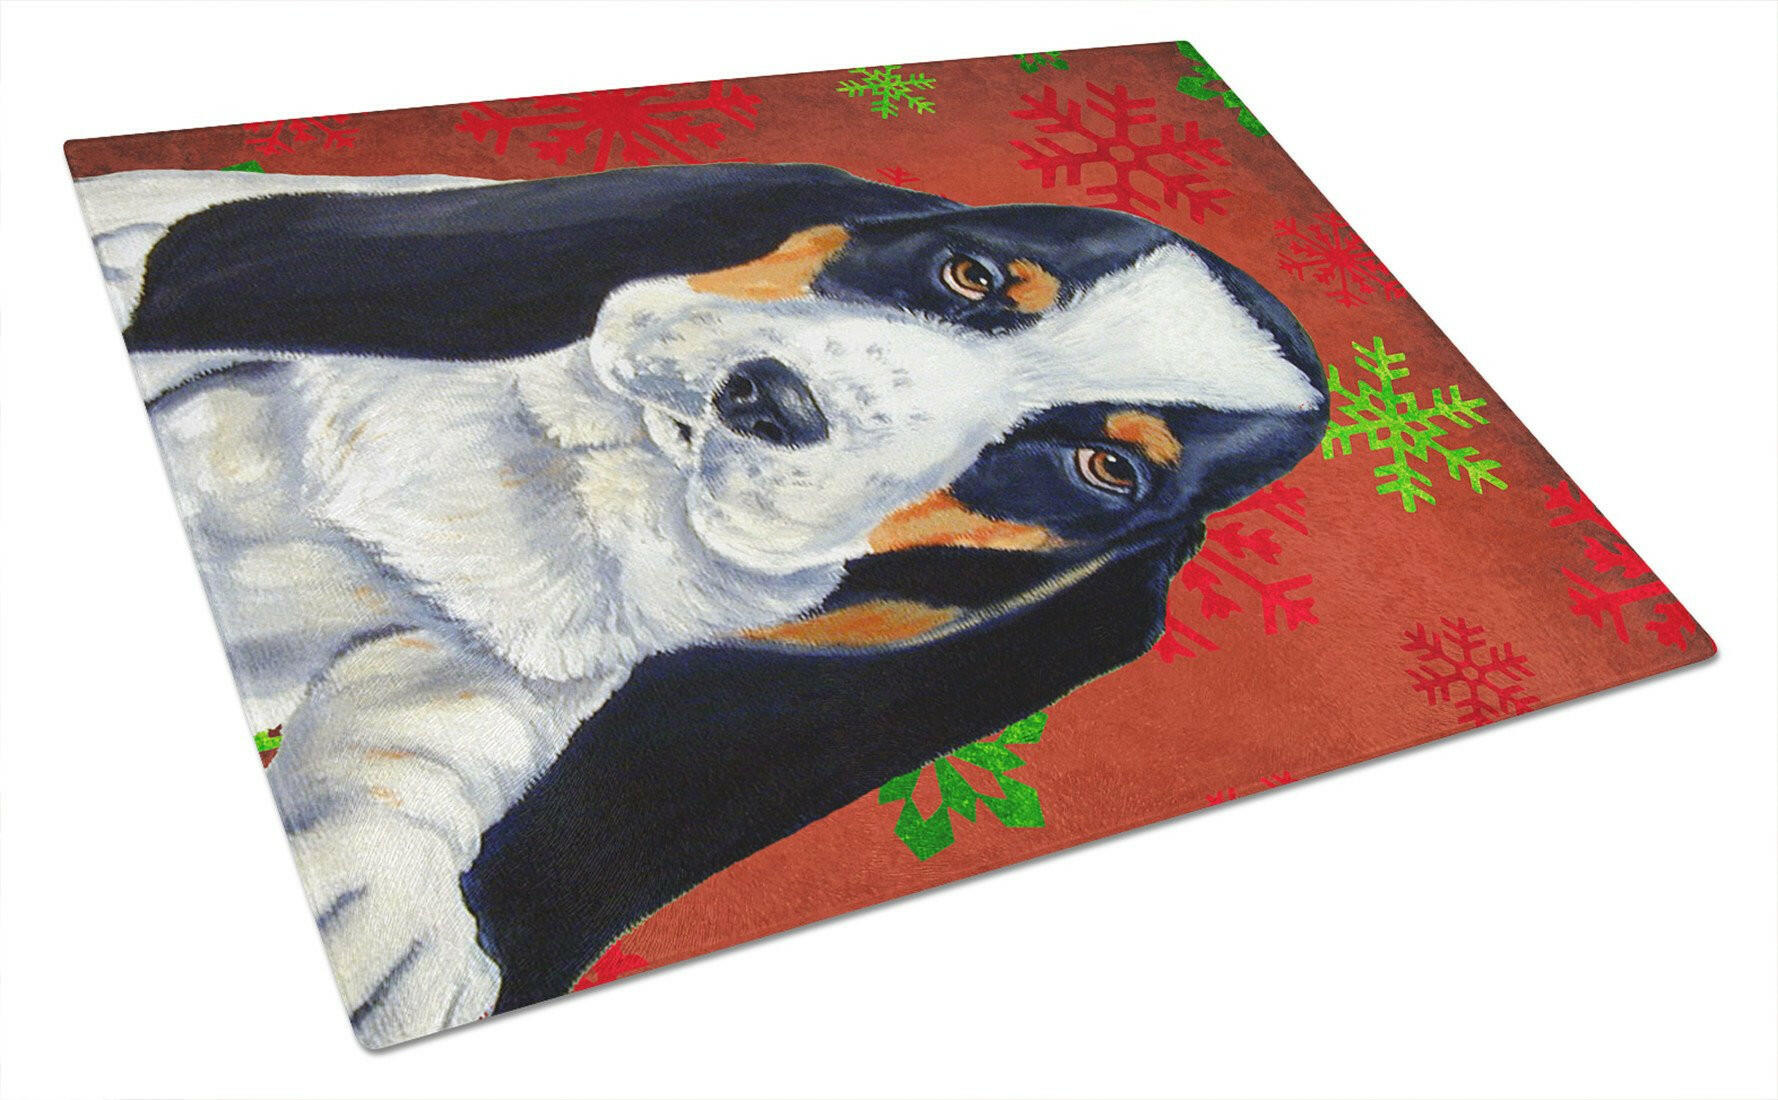 Basset Hound Red and Green Snowflakes Christmas Glass Cutting Board Large by Caroline's Treasures